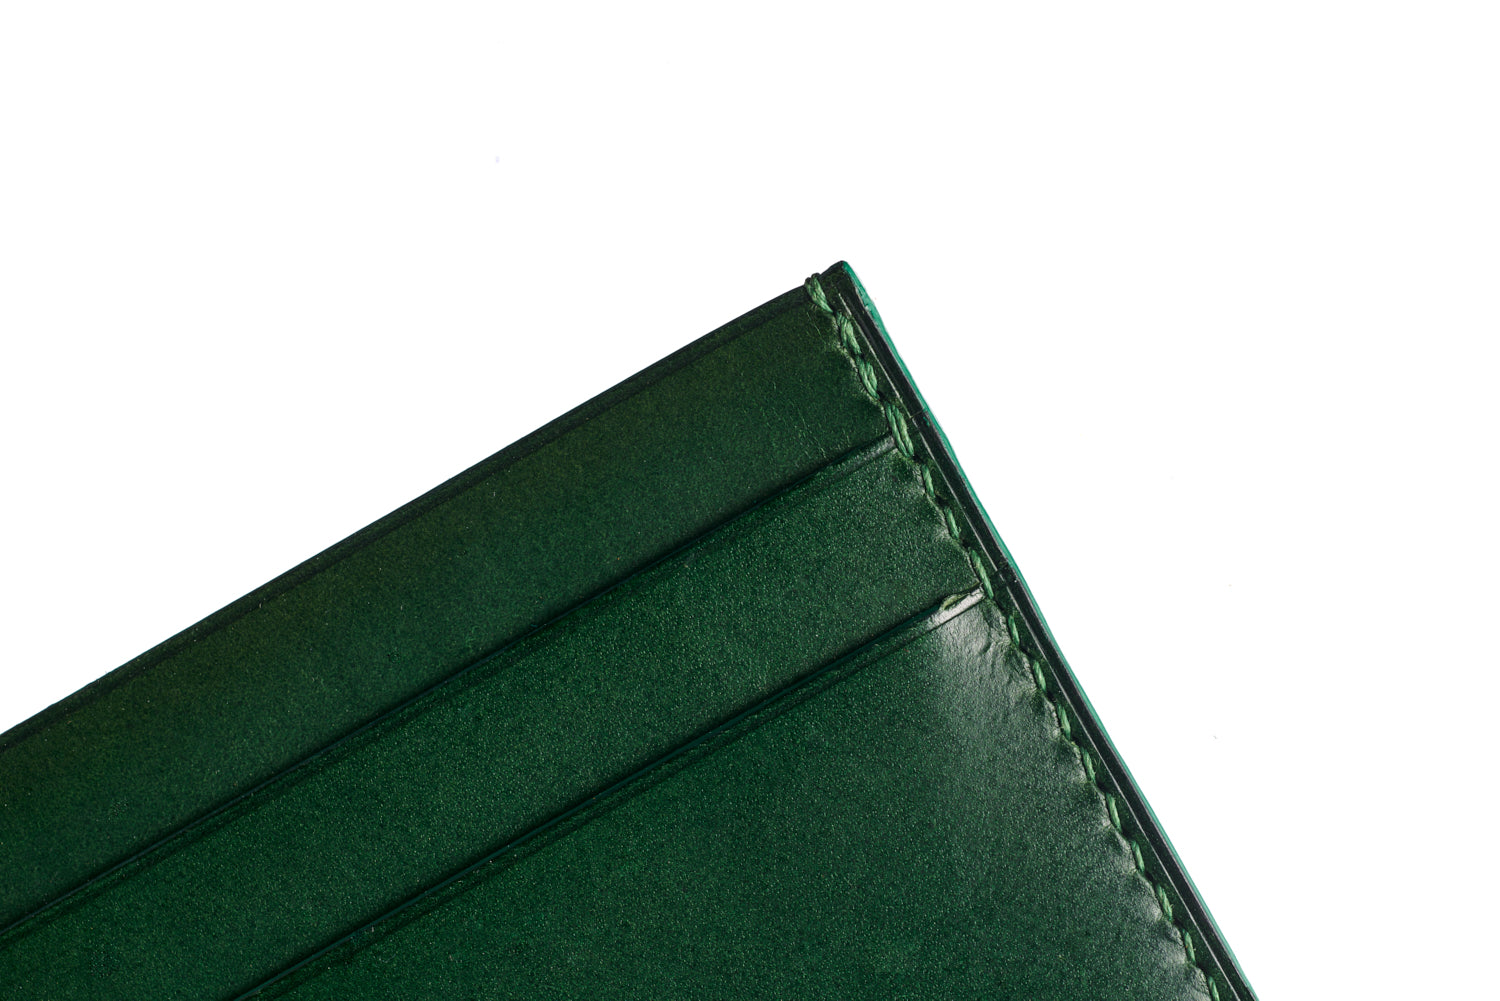 Racing Green Buttero Slim Card Case The perfect Green shade